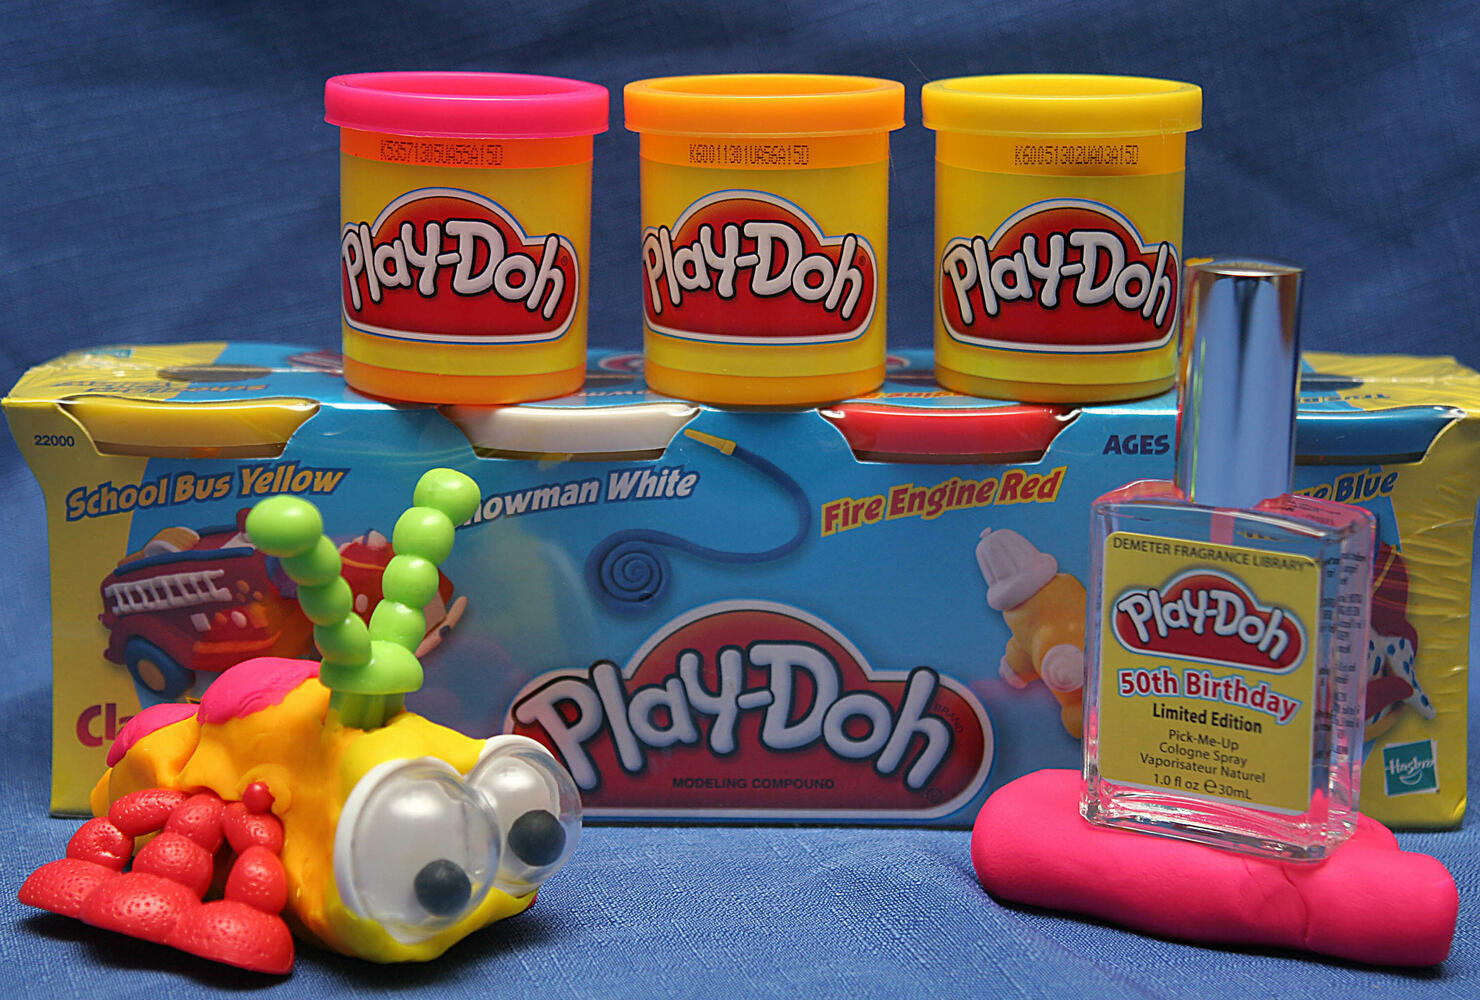 Play-doh's smell trademarked by Hasbro